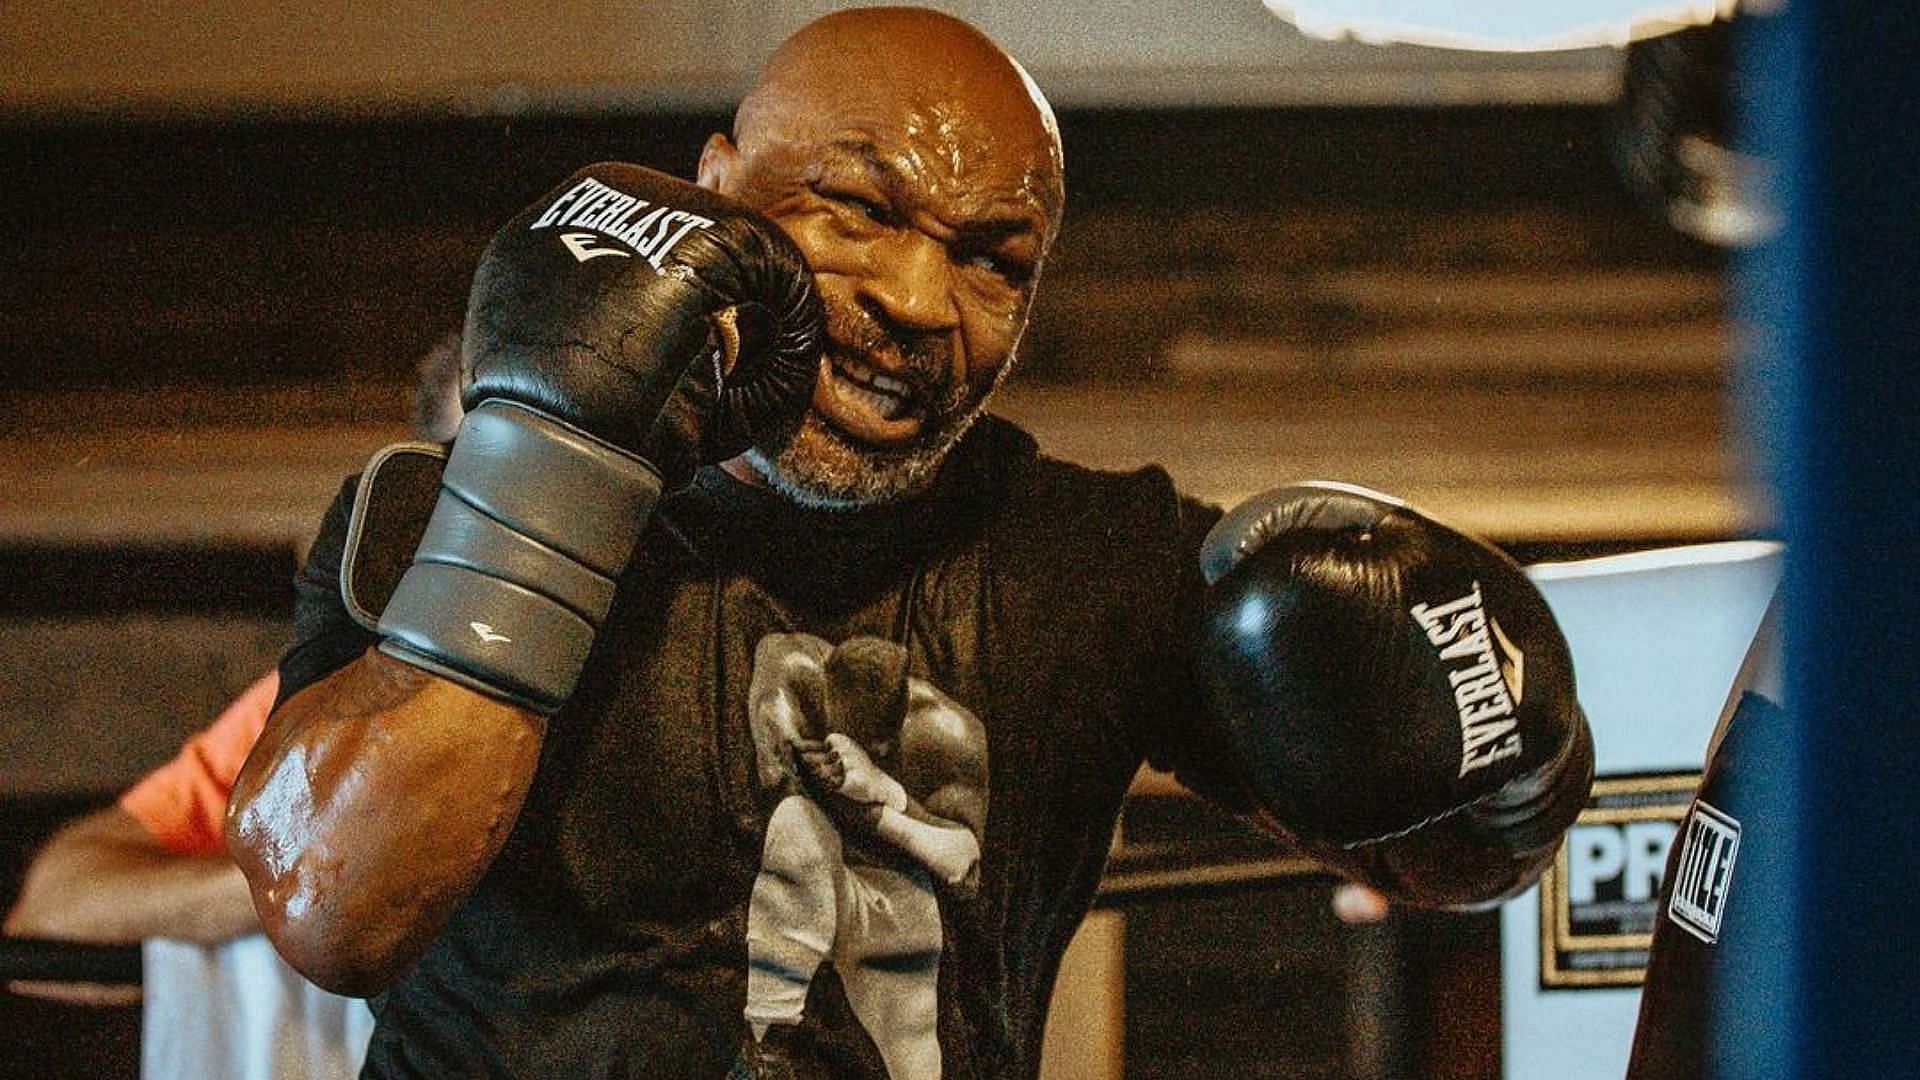 Kevin McBride -- The day I retired Mike Tyson - ESPN